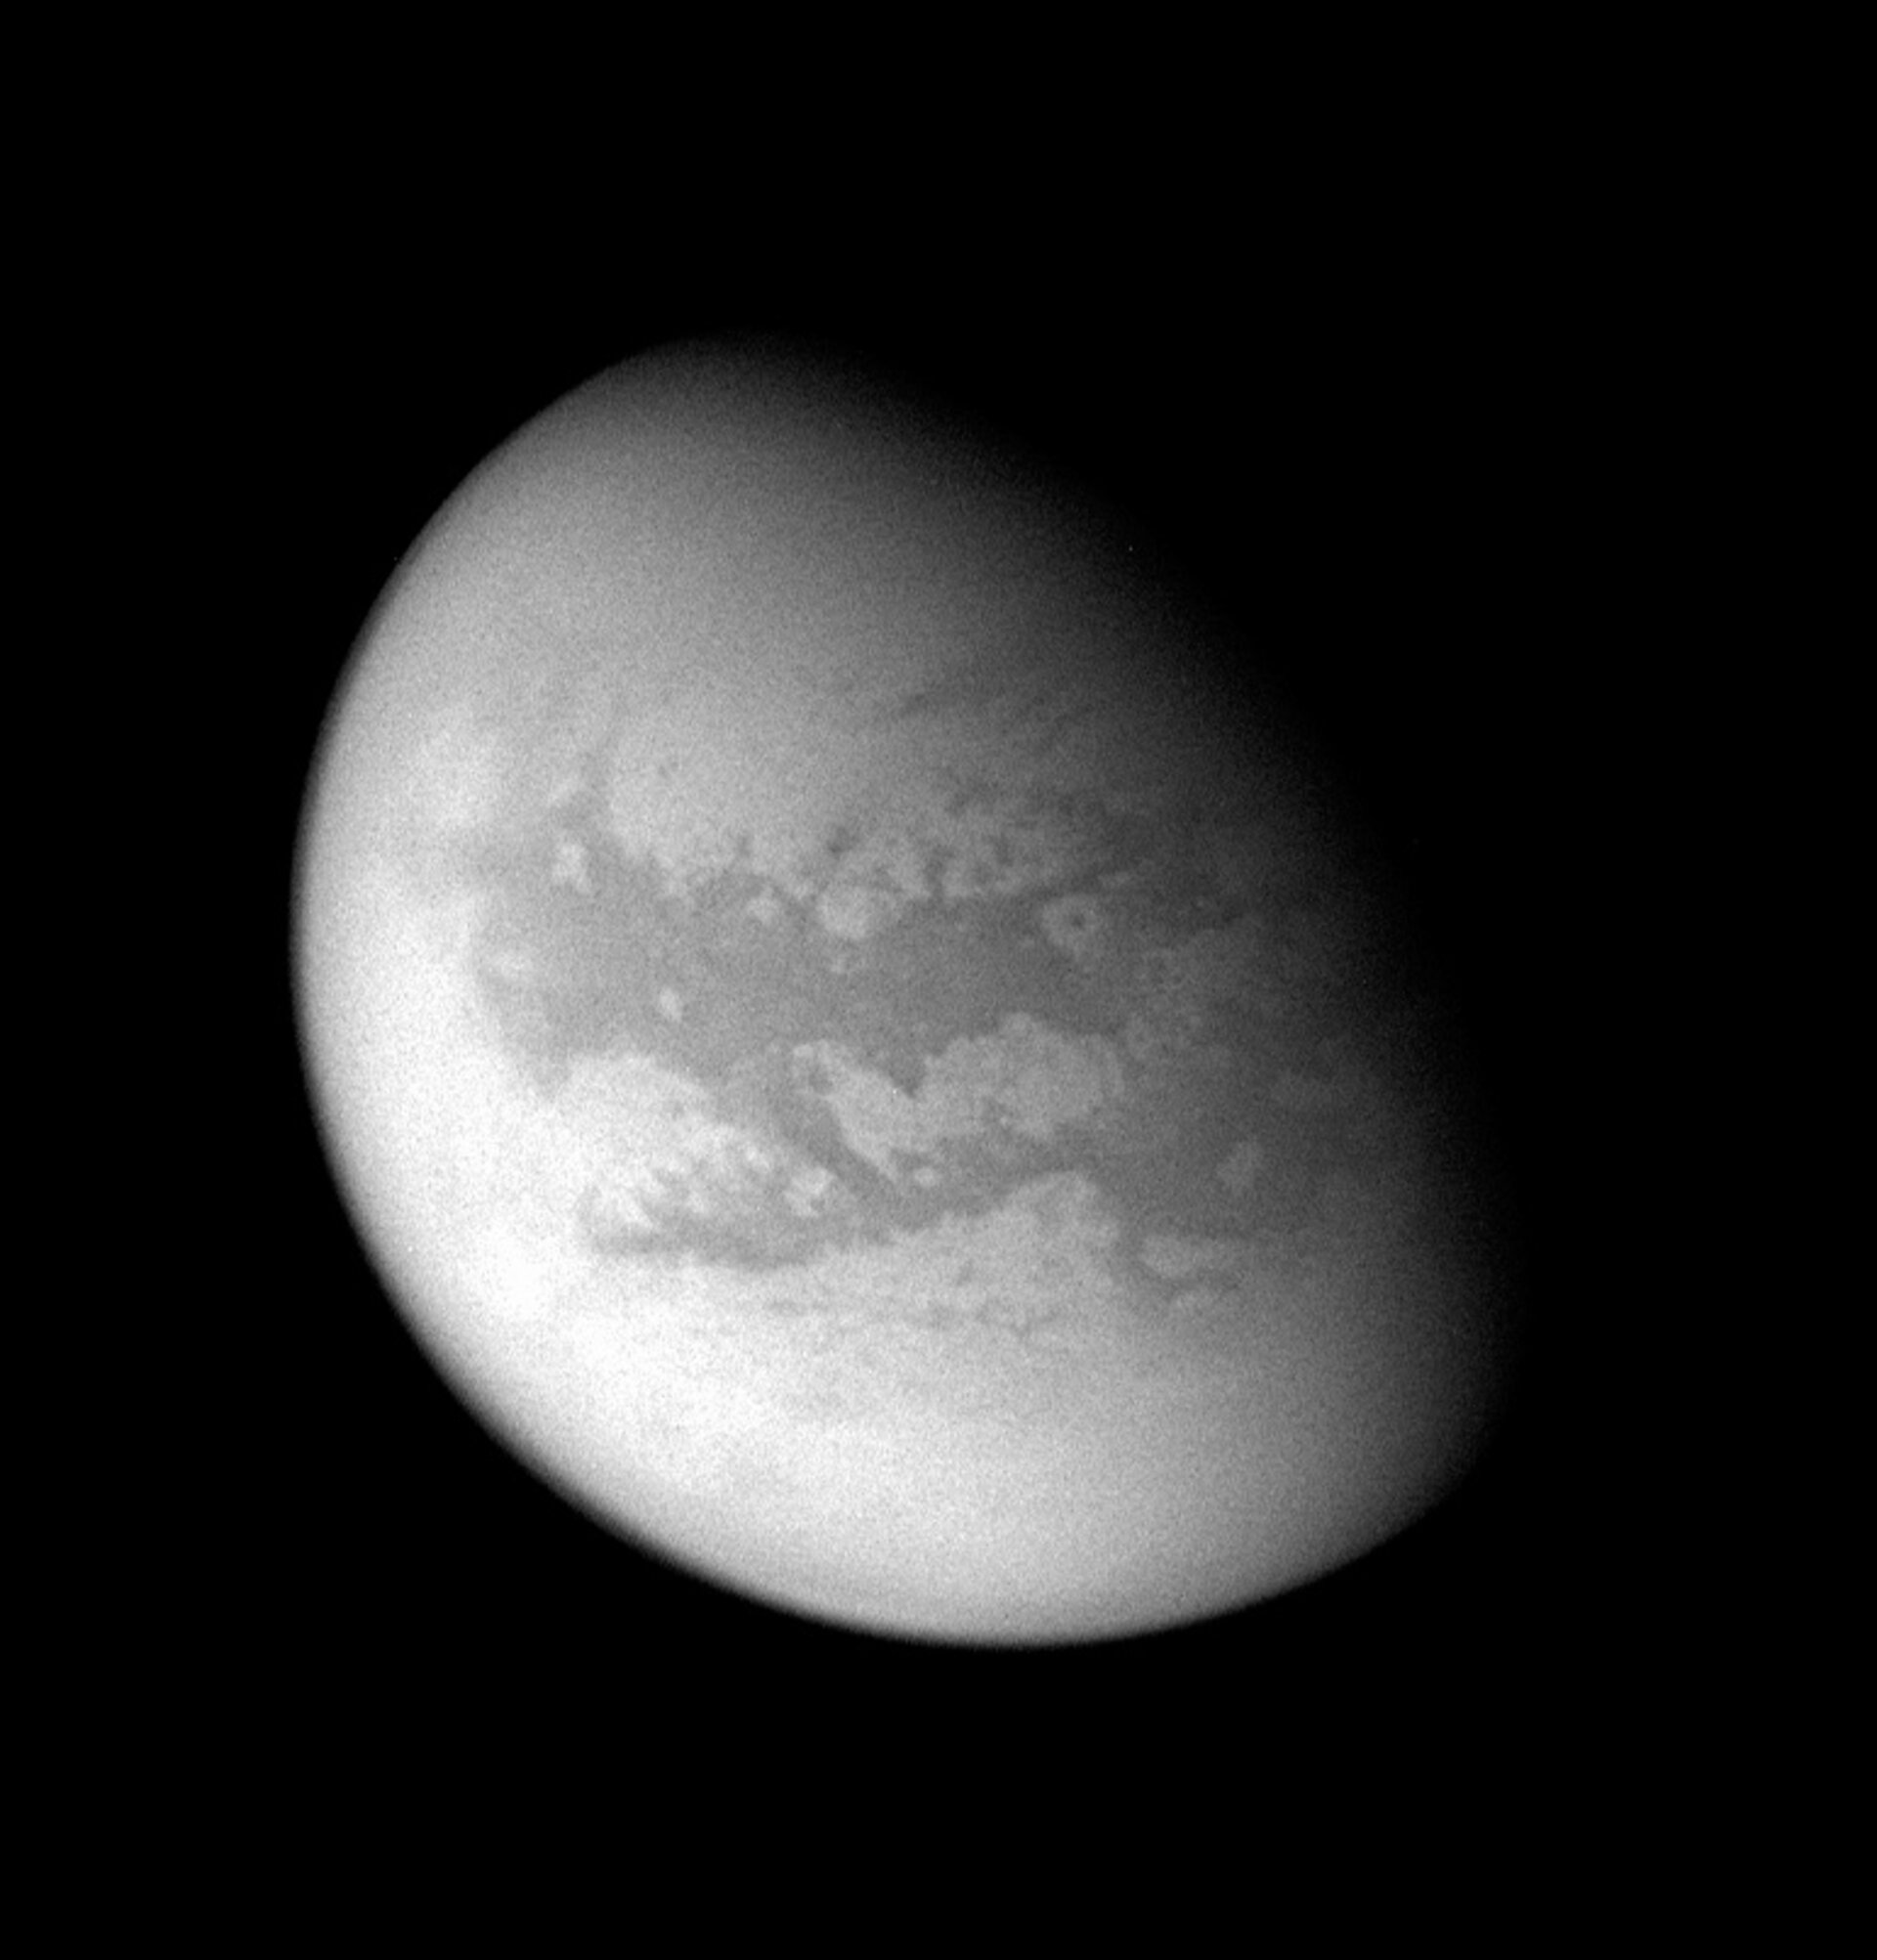 Titan as seen from Cassini's 22 August 2005 flyby